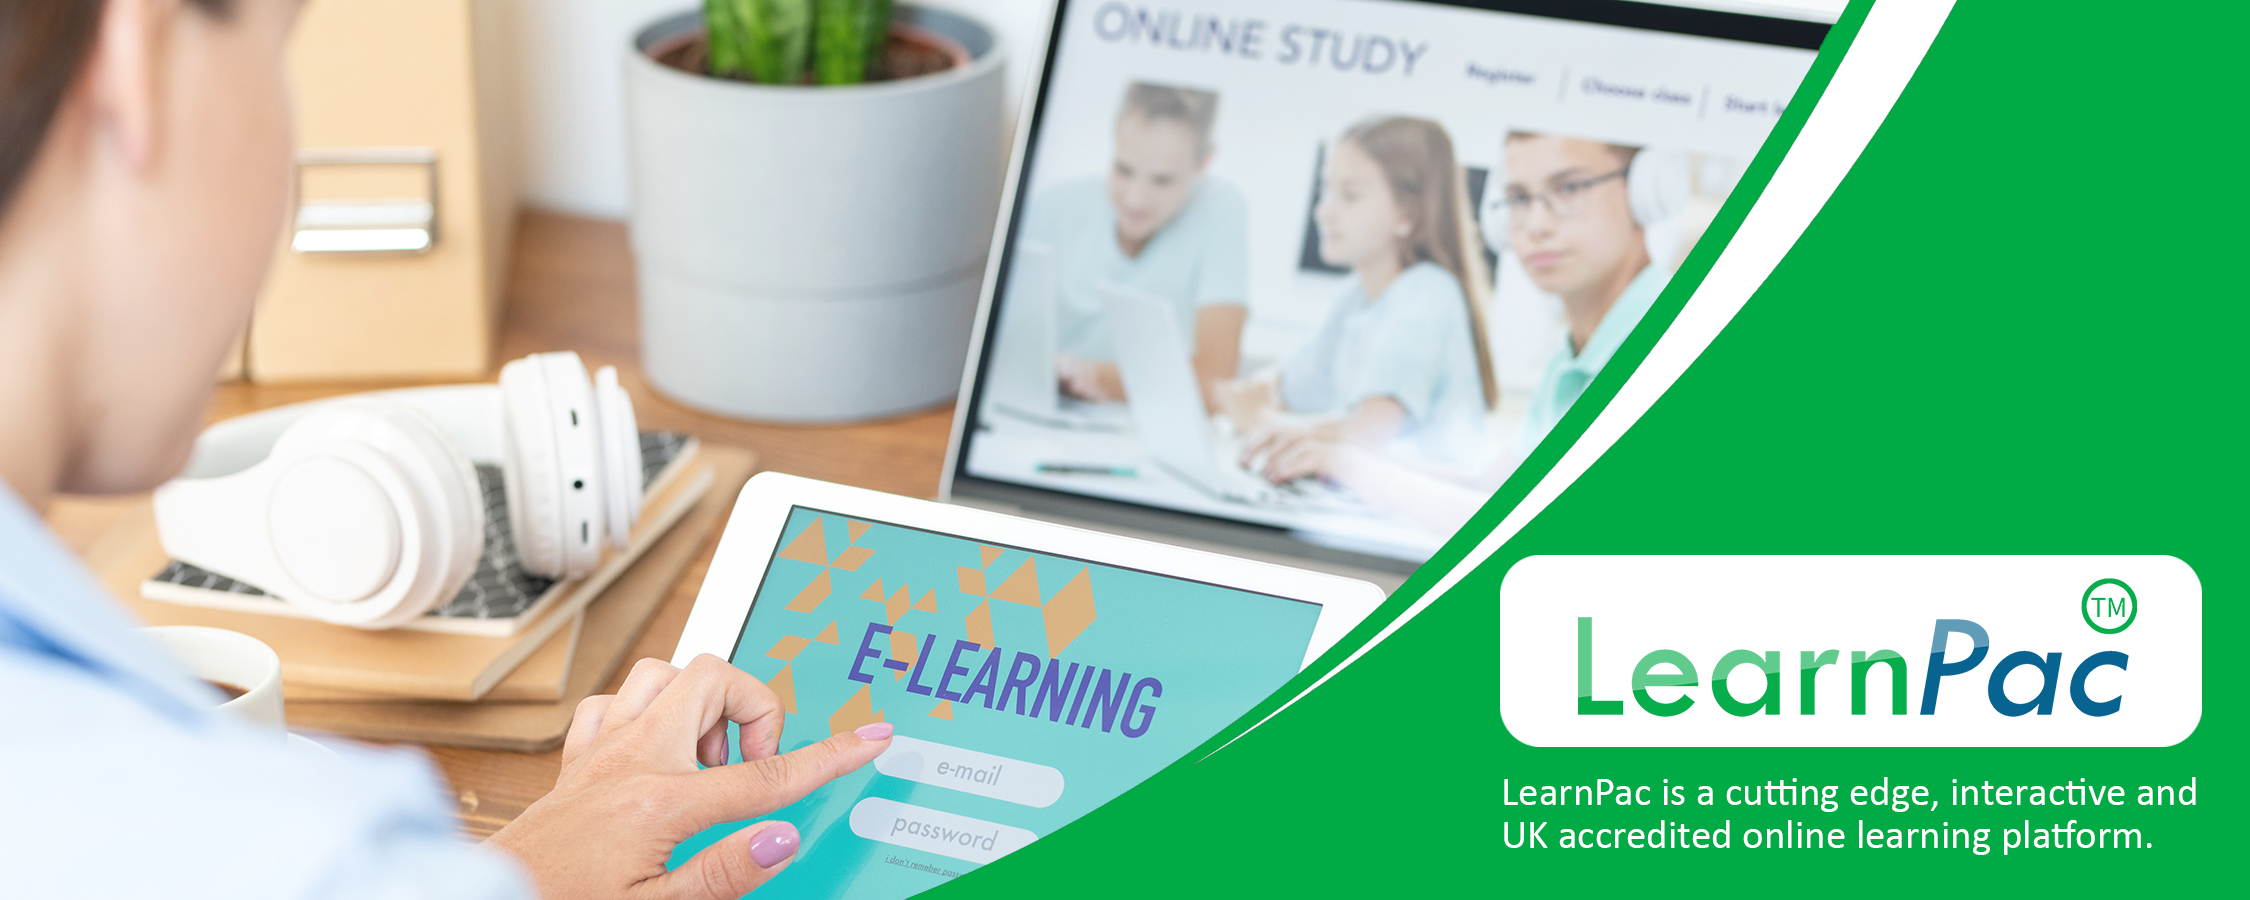 Mandatory Training for Support Workers - E-Learning Courses - LearnPac Systems UK -